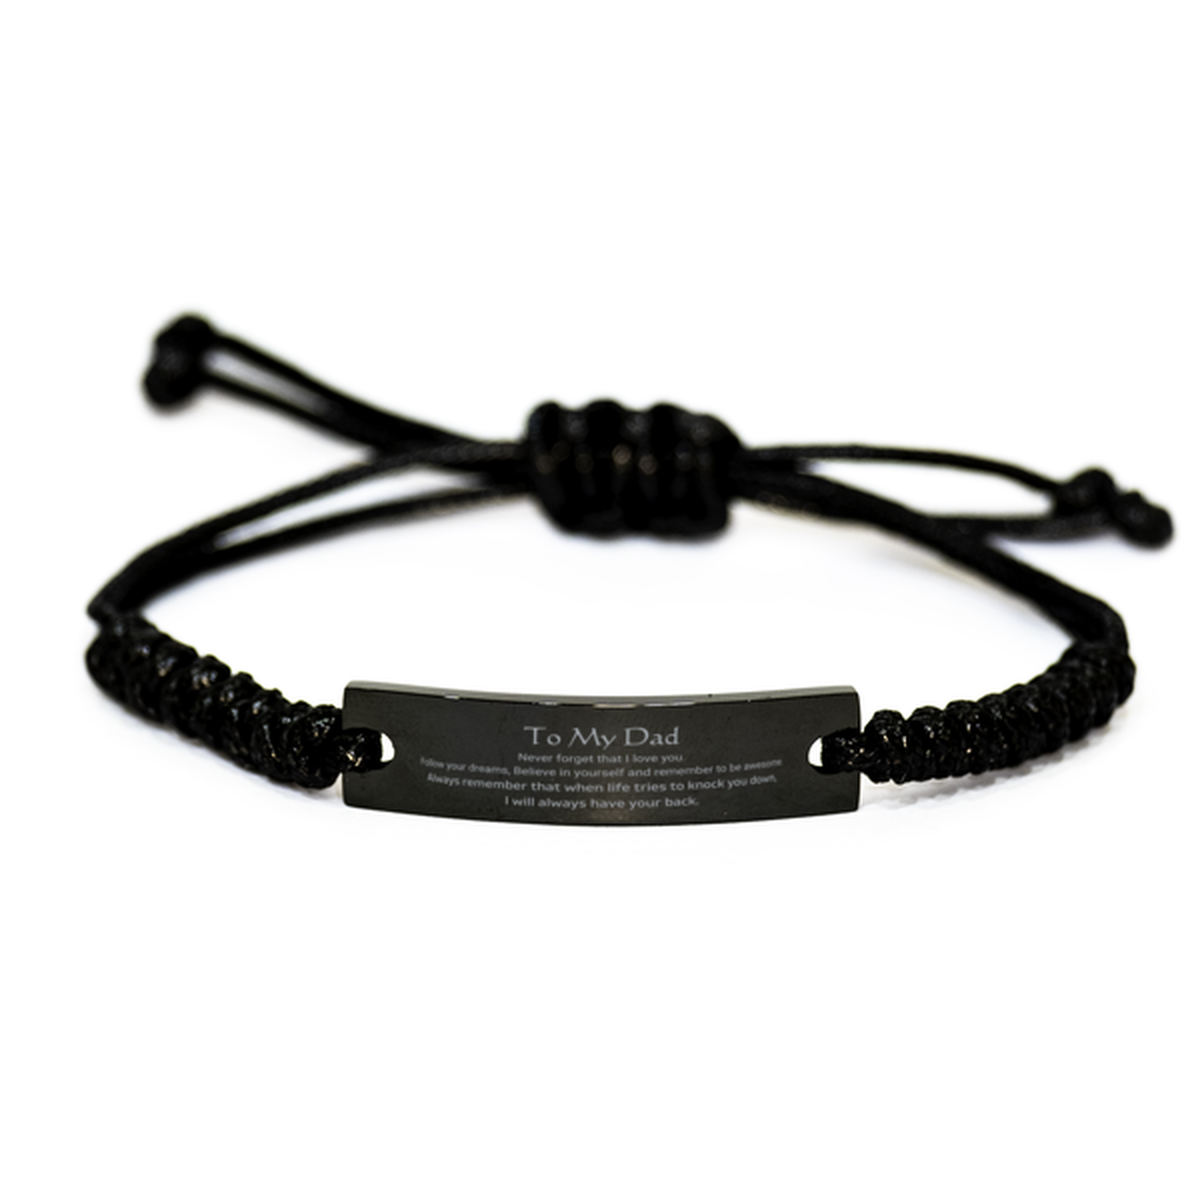 Inspirational Gifts for Dad, Follow your dreams, Believe in yourself, Dad Black Rope Bracelet, Birthday Christmas Unique Gifts For Dad